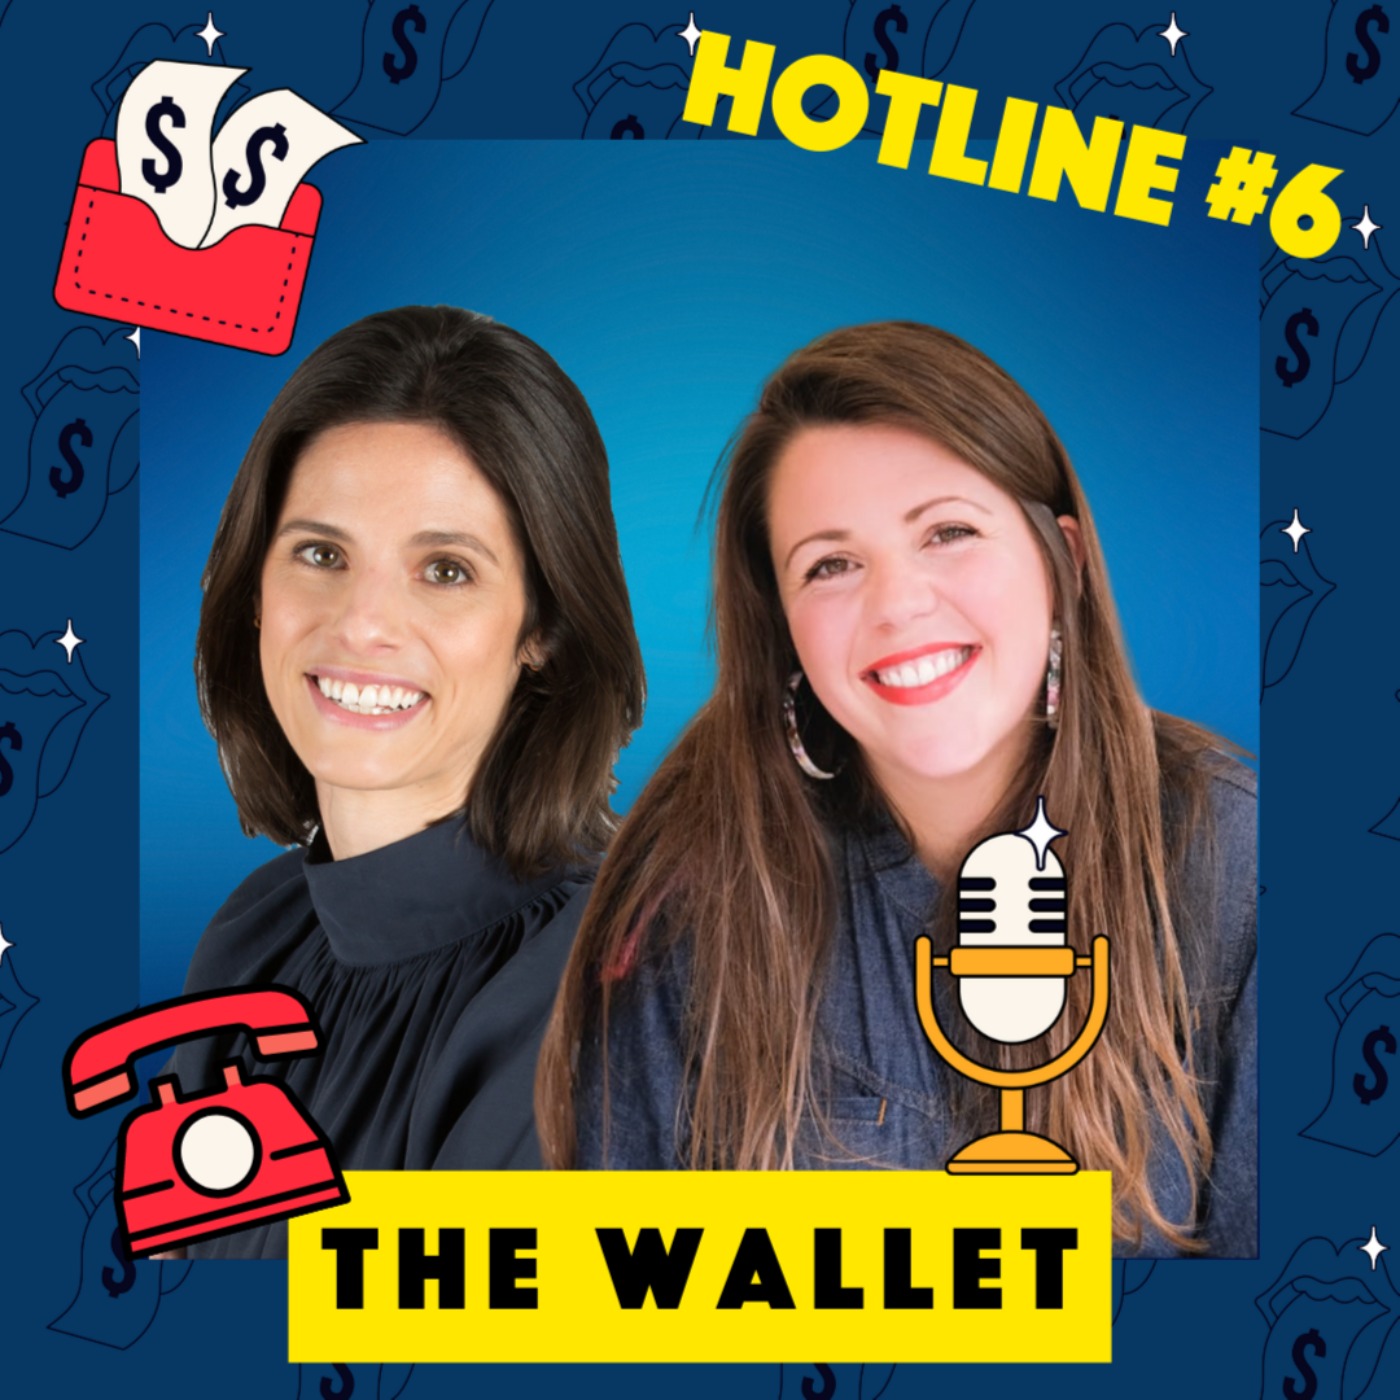 How Can I Have a Positive Money Chat With Friends? | Money Hotline #6